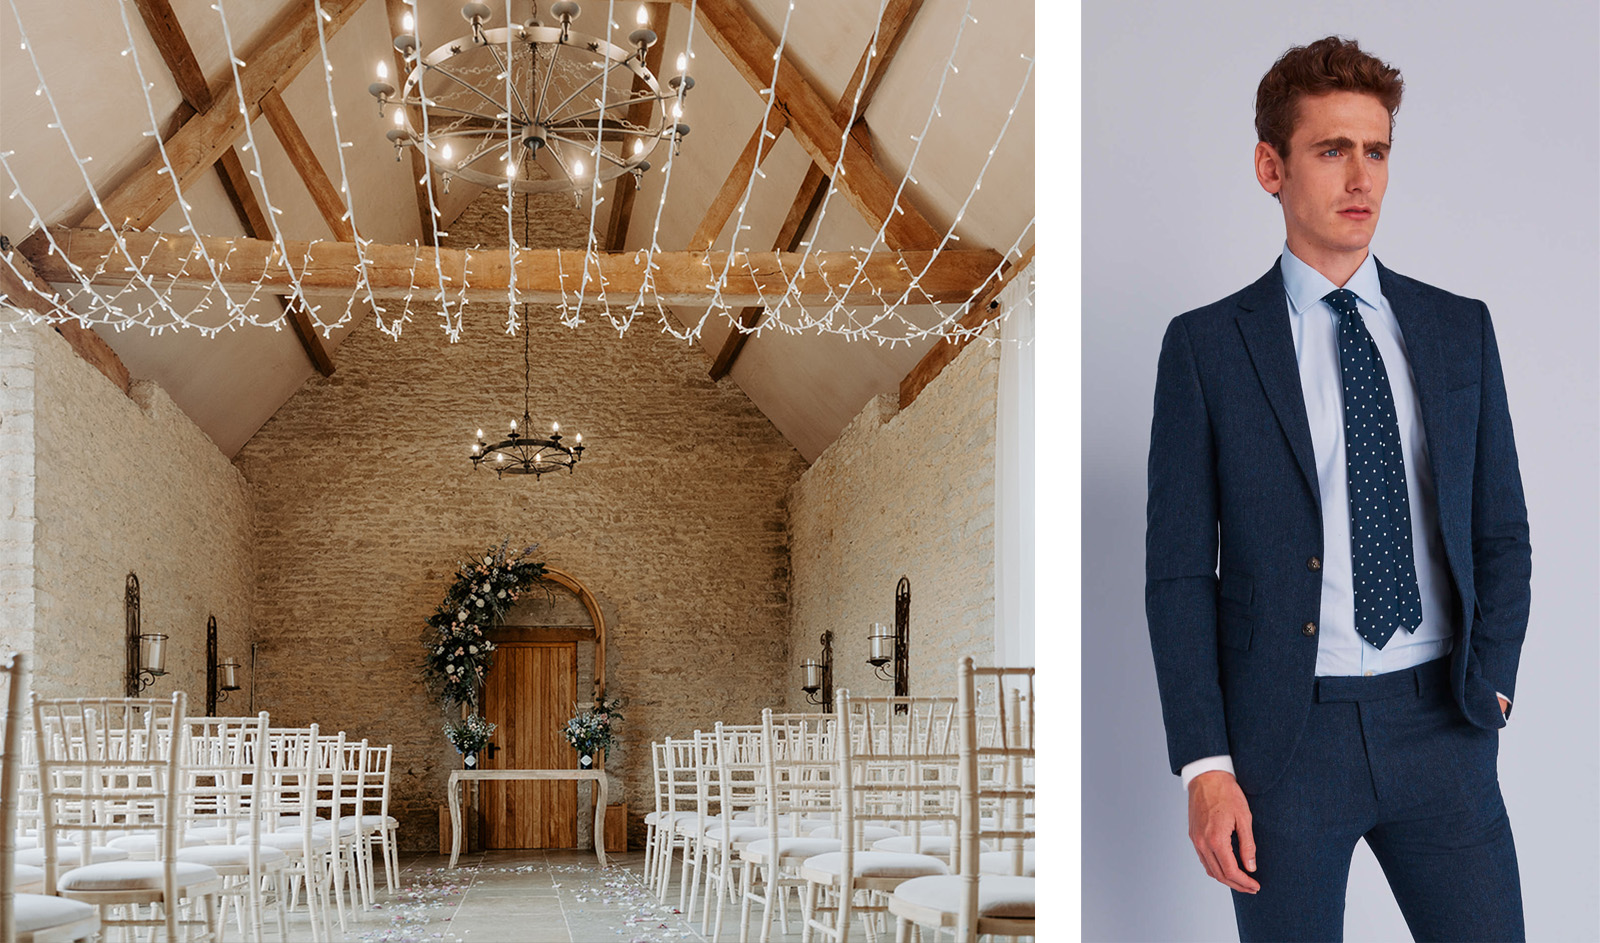 rustic venue and wedding suit by moss bros